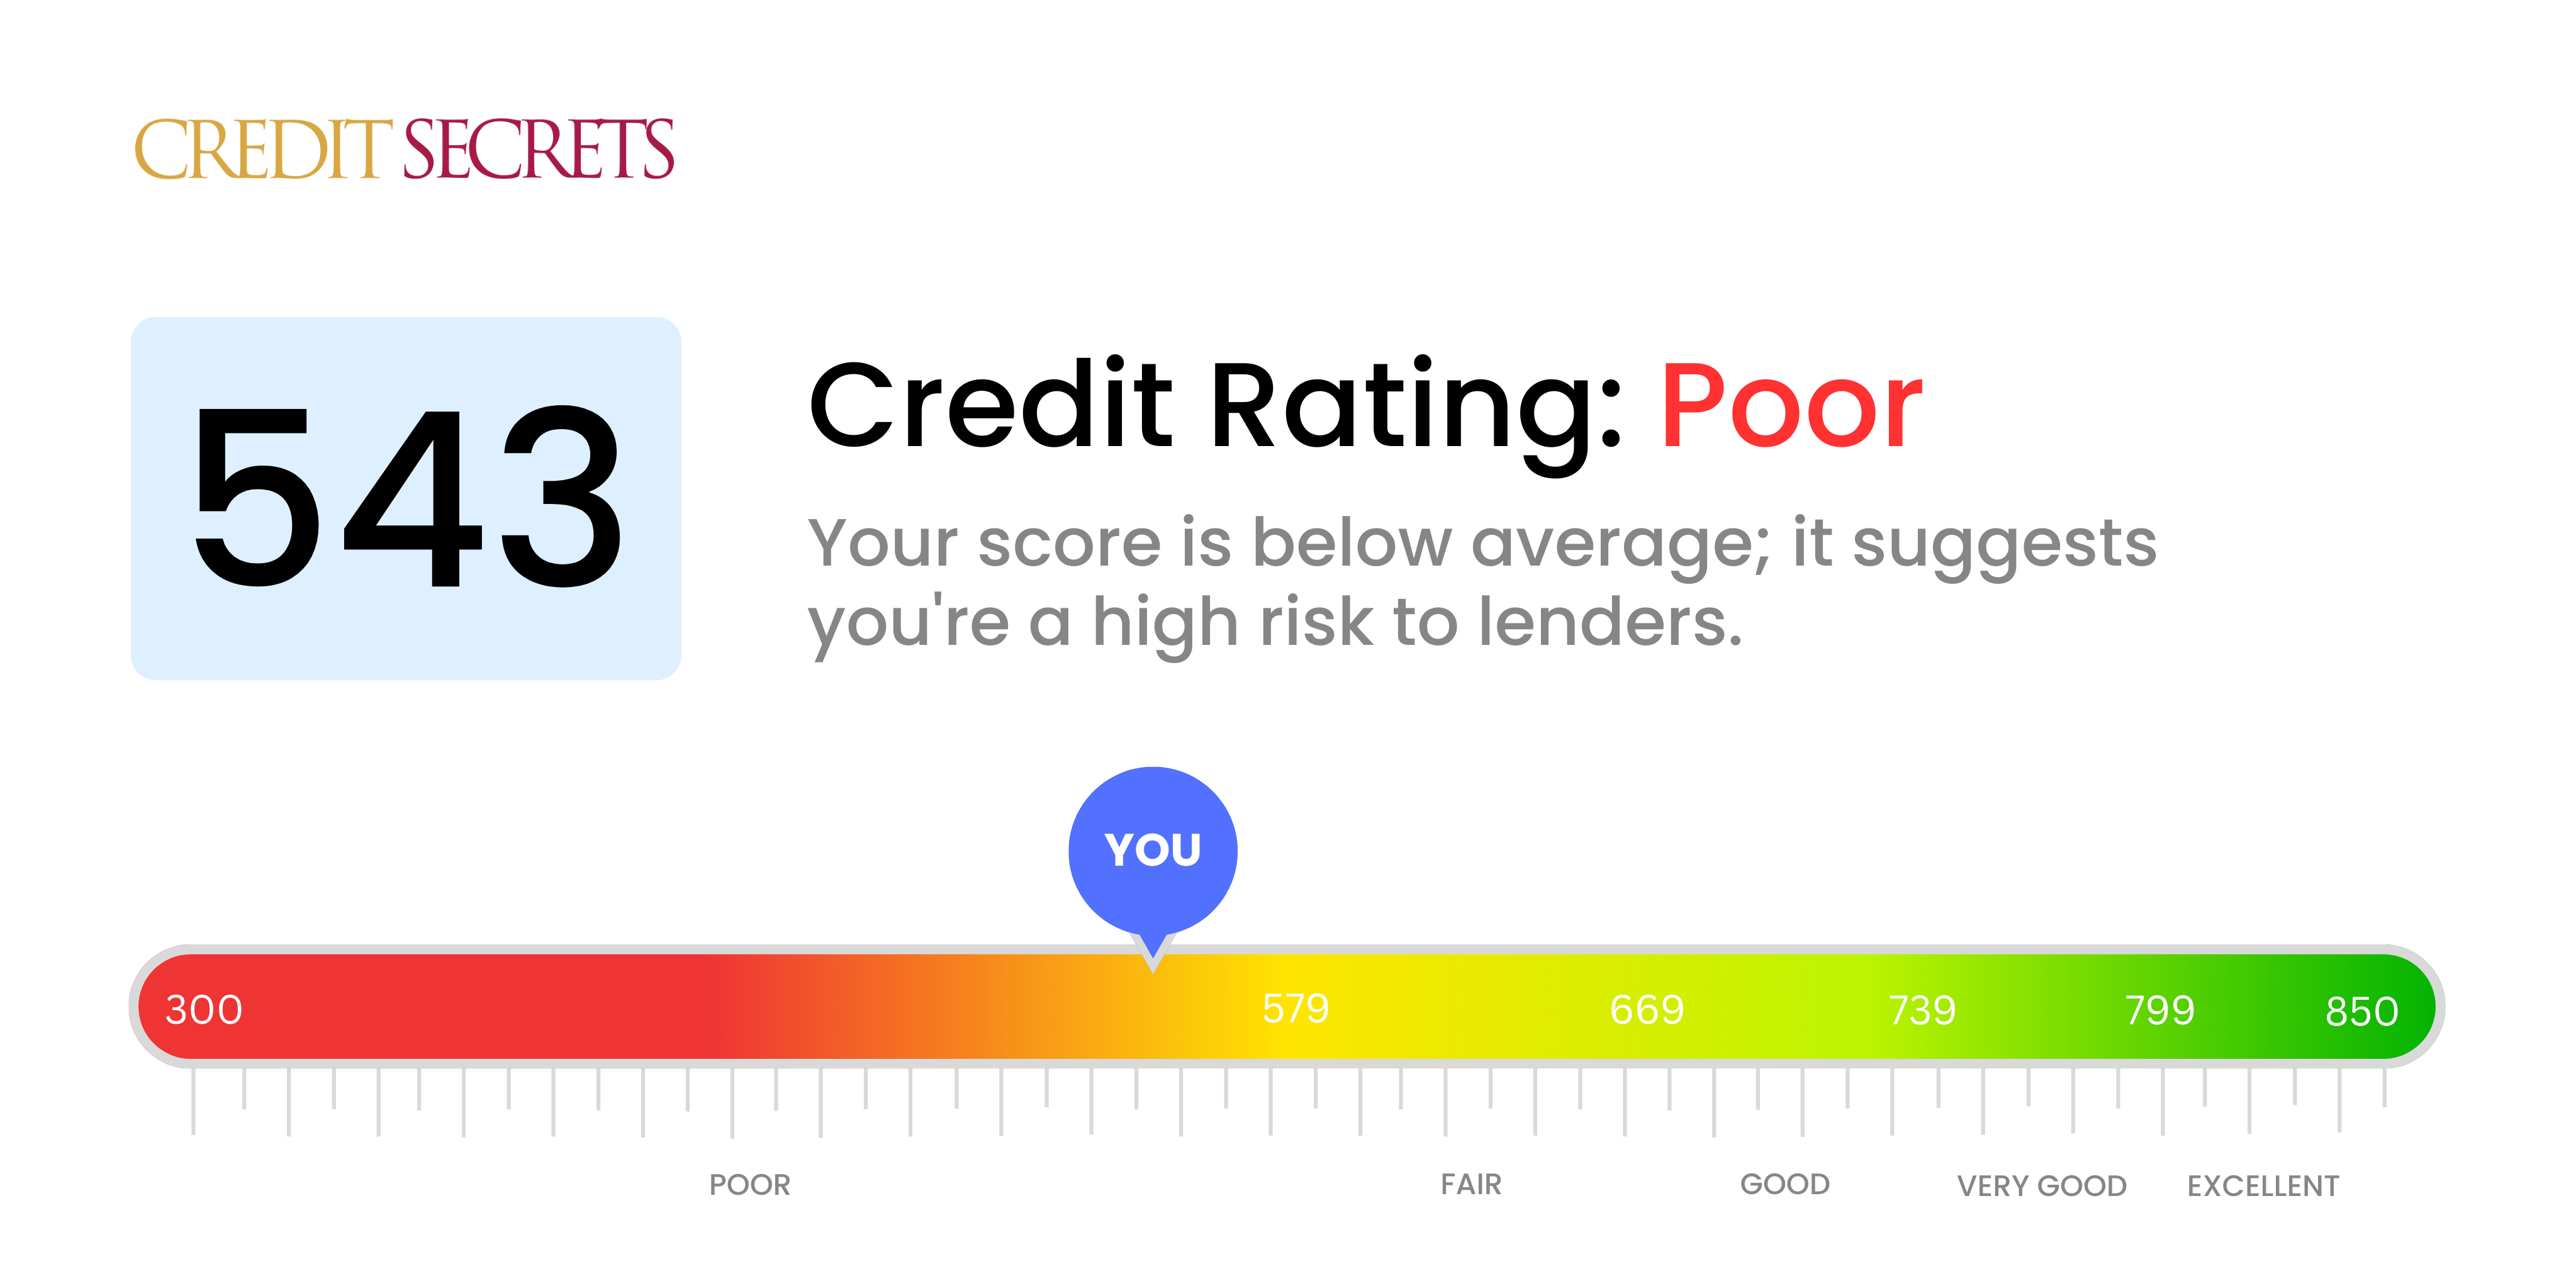 Is 543 a good credit score?